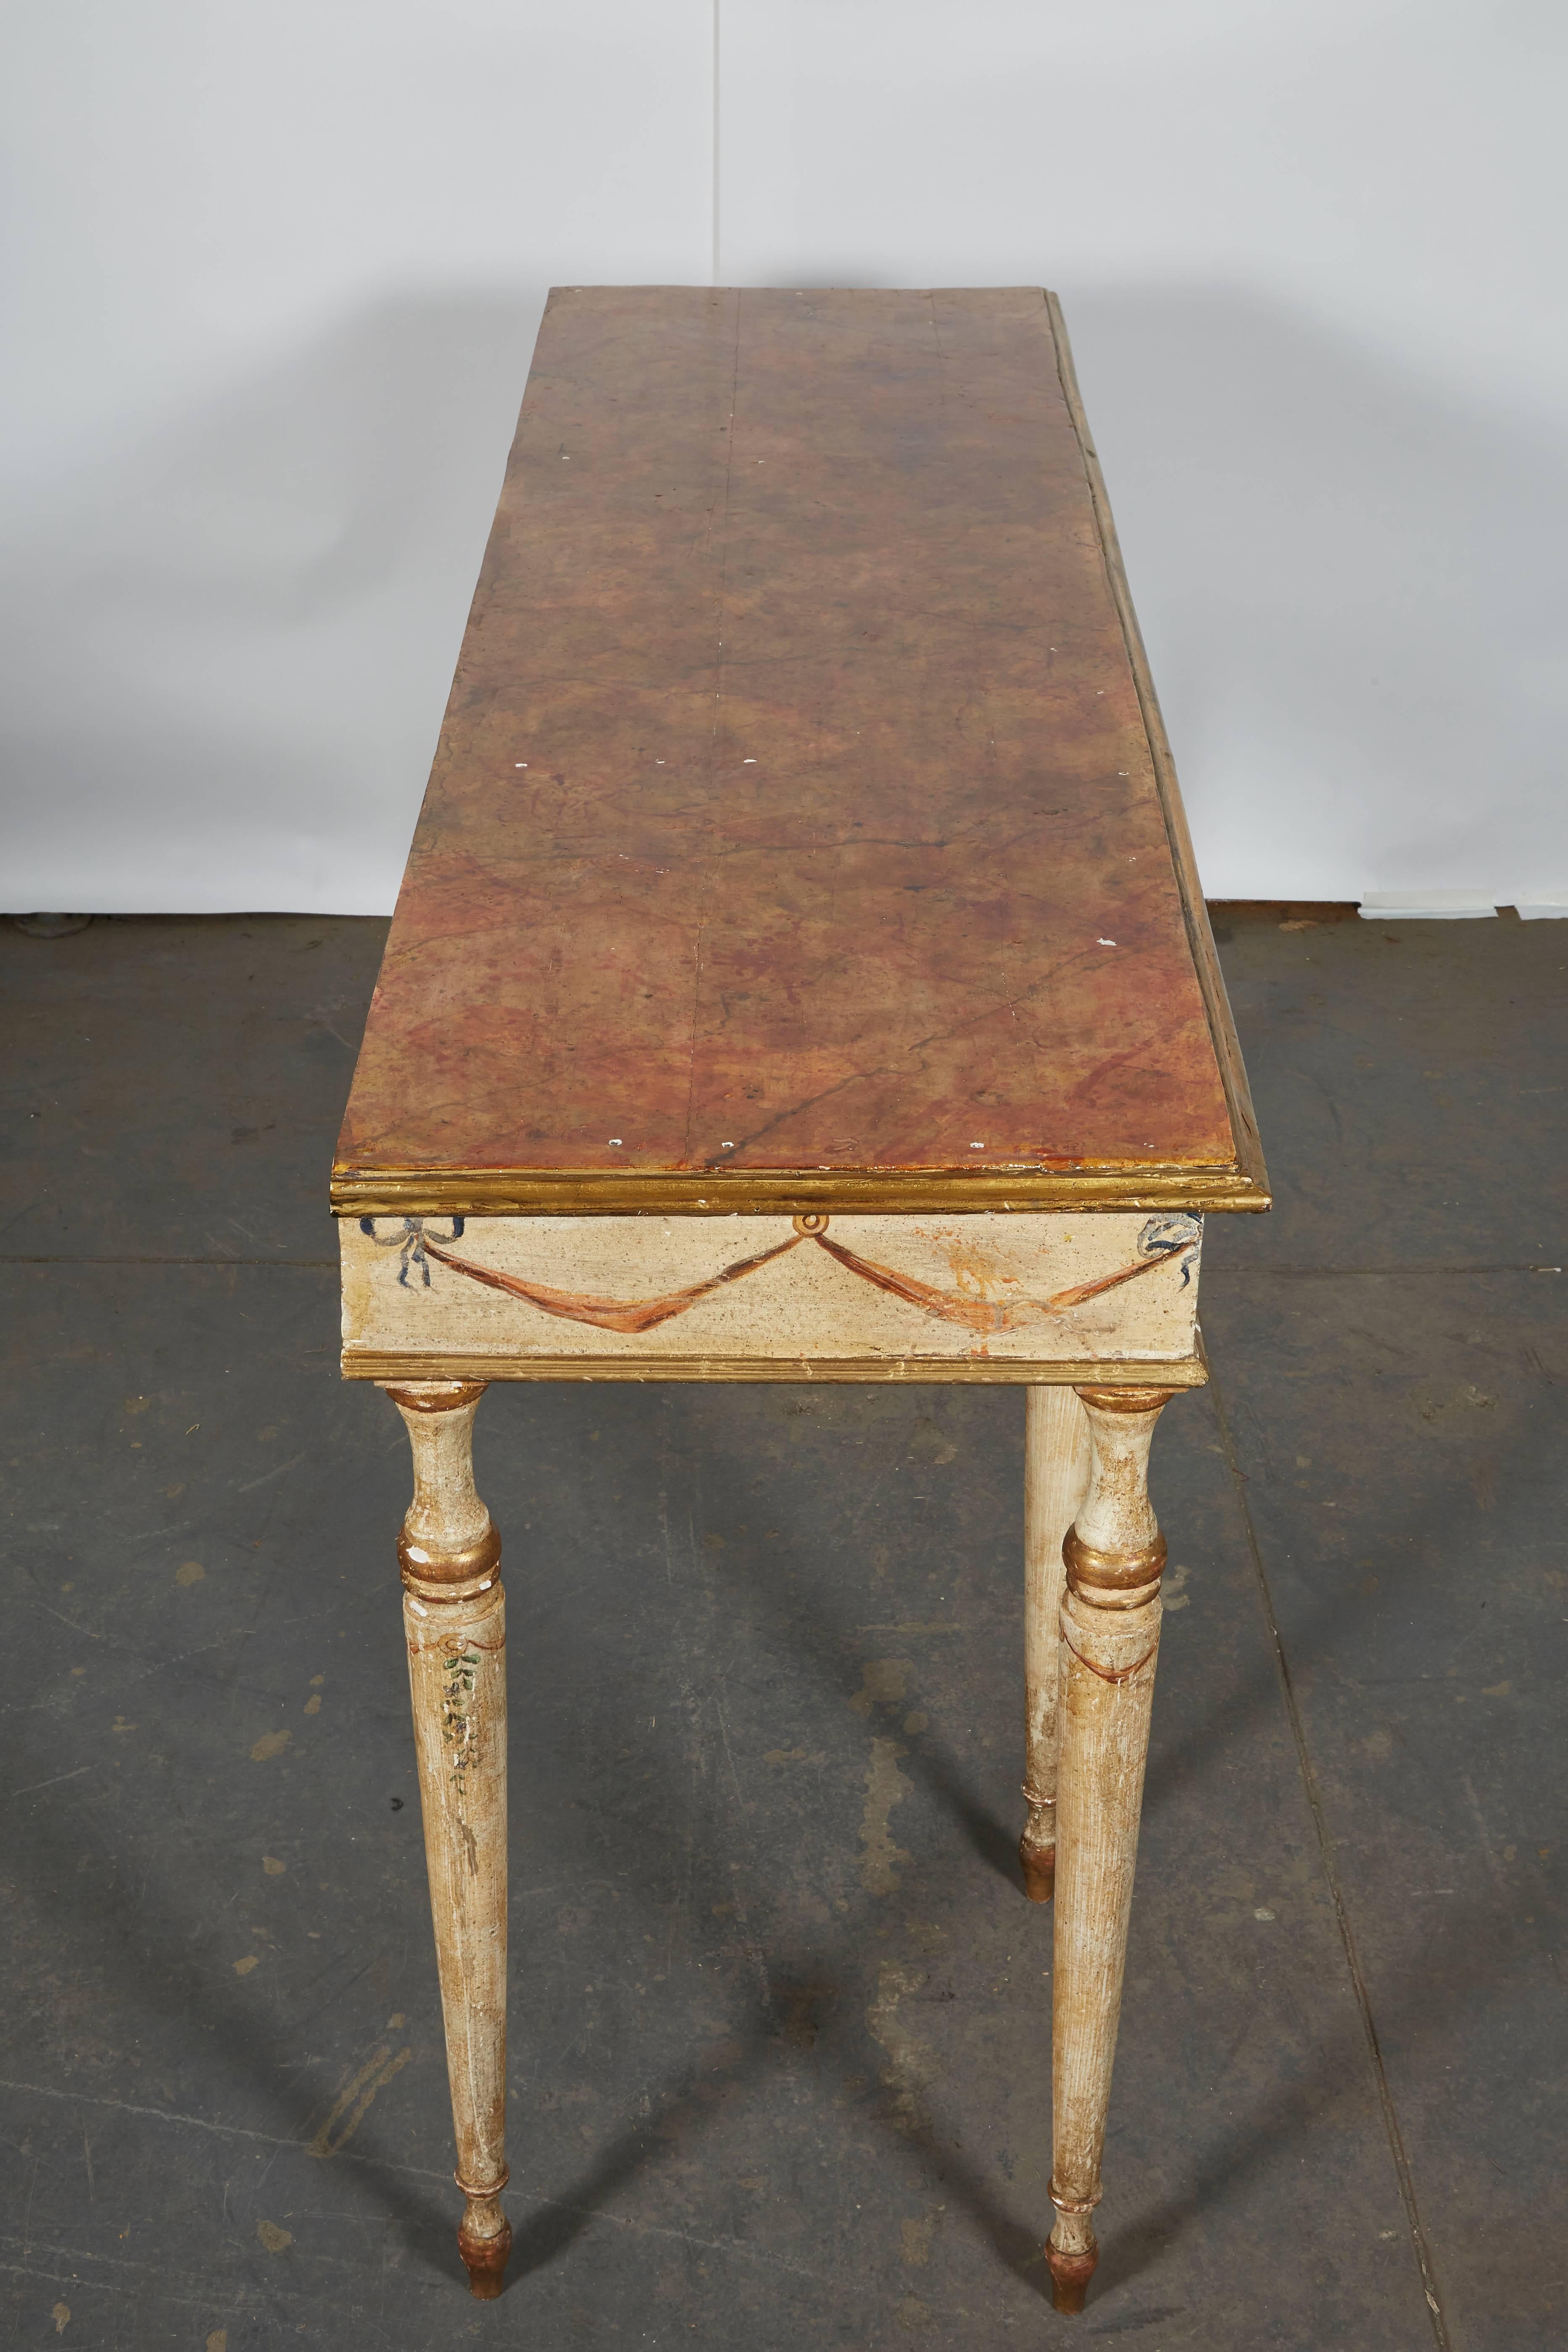 19th Century Louis XVI Style Painted Console Table with Faux Marble Top